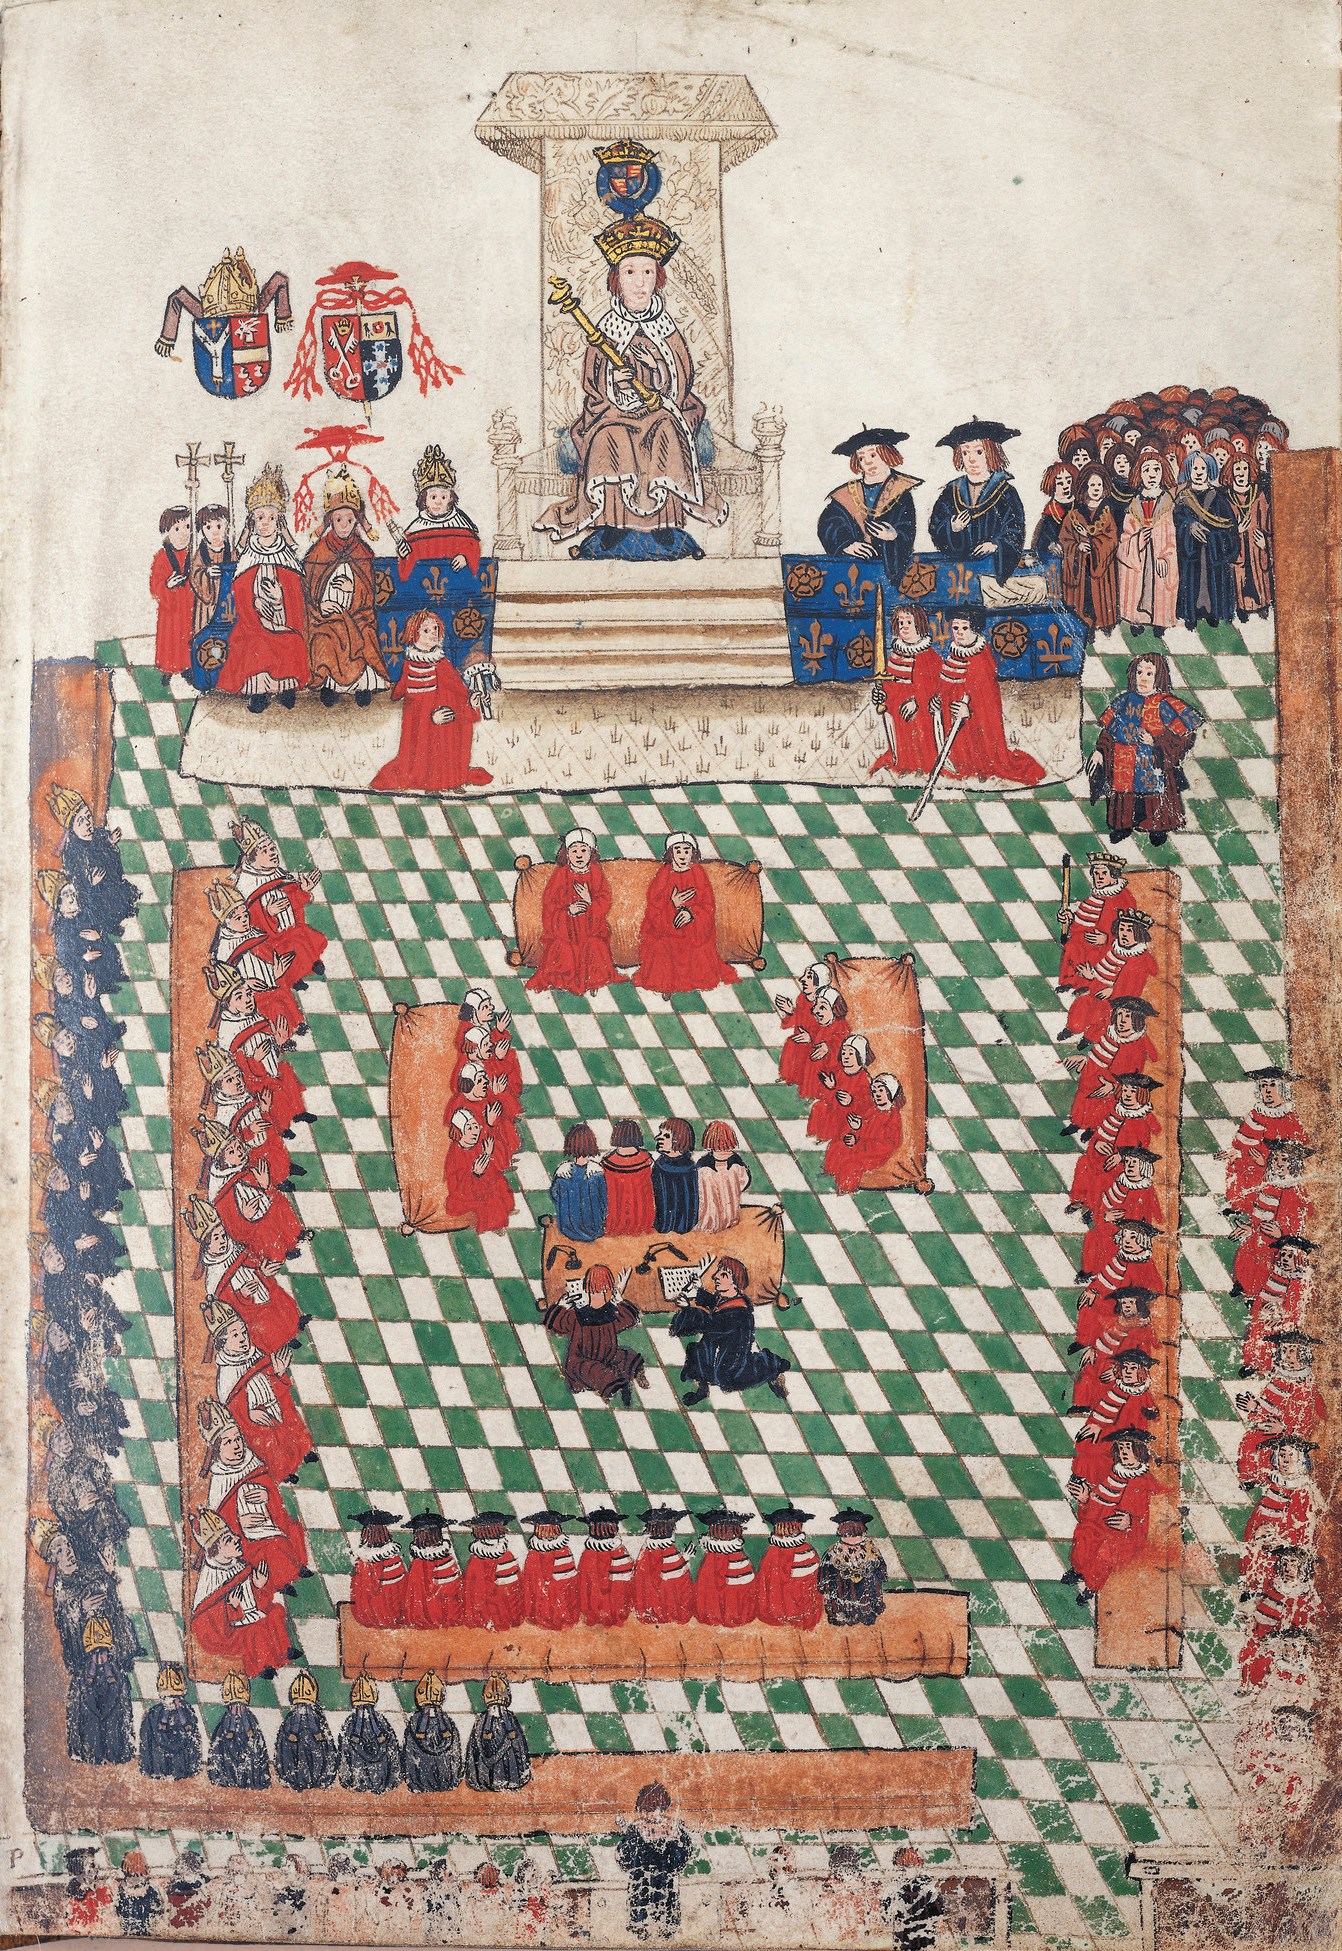 An illustration of King Henry VIII opening the English Parliament in 1523. This is thought to be the earliest surviving contemporary depiction of an opening of Parliament. Judges and law officers sit on four woolsacks in the centre. (Photo credit: <a href='https://www.rct.uk/collection/1047414/the-wriothesley-garter-book'>The Royal Collection Trust, RCIN 1047414</a>)